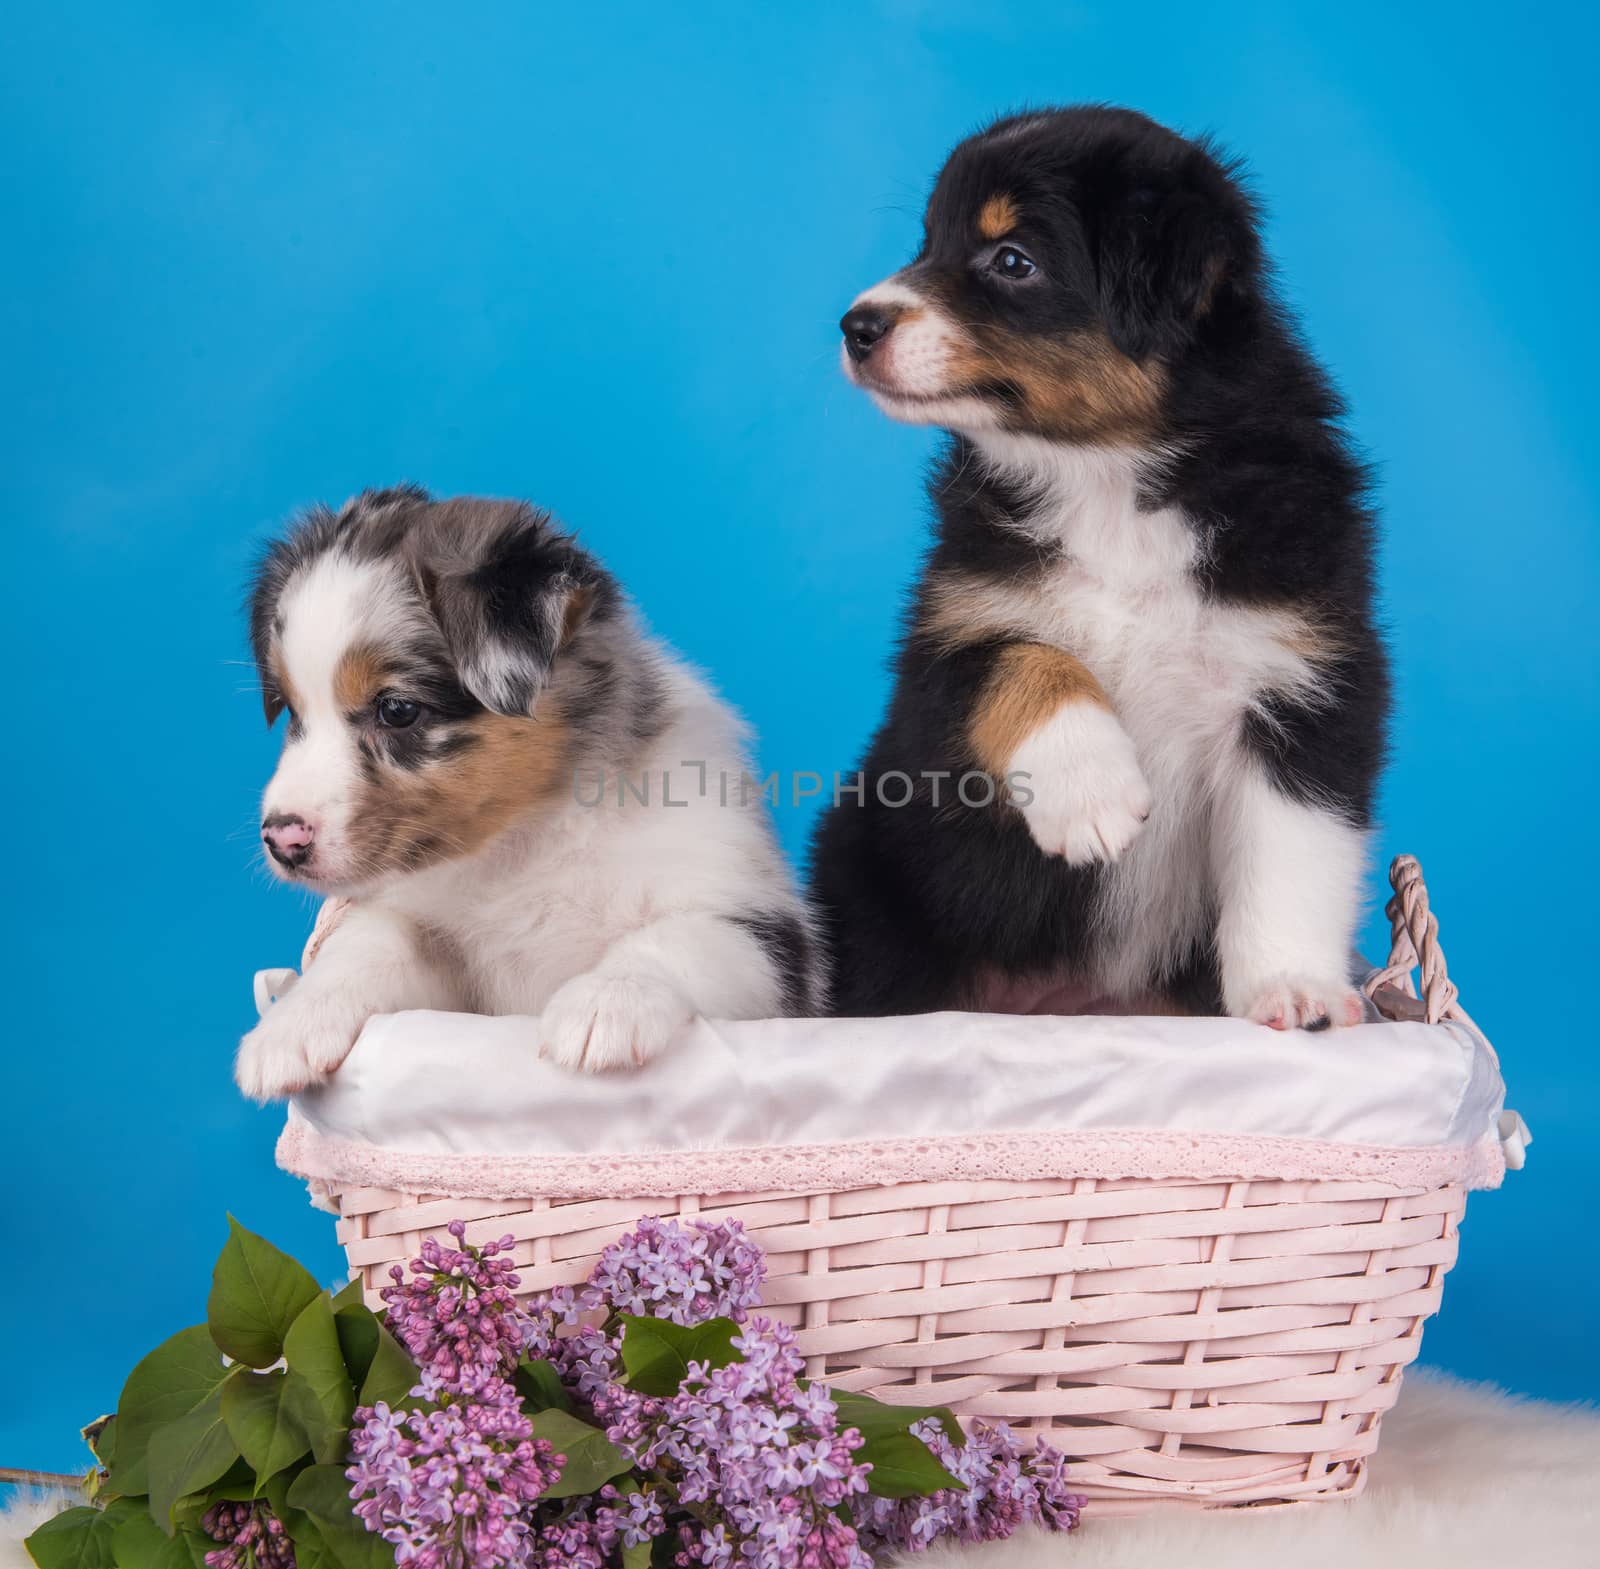 Two Australian Shepherd puppies dogs tri-color black, brown and white and merle six weeks old, sitting inside basket with lilac flowers on light blue background.